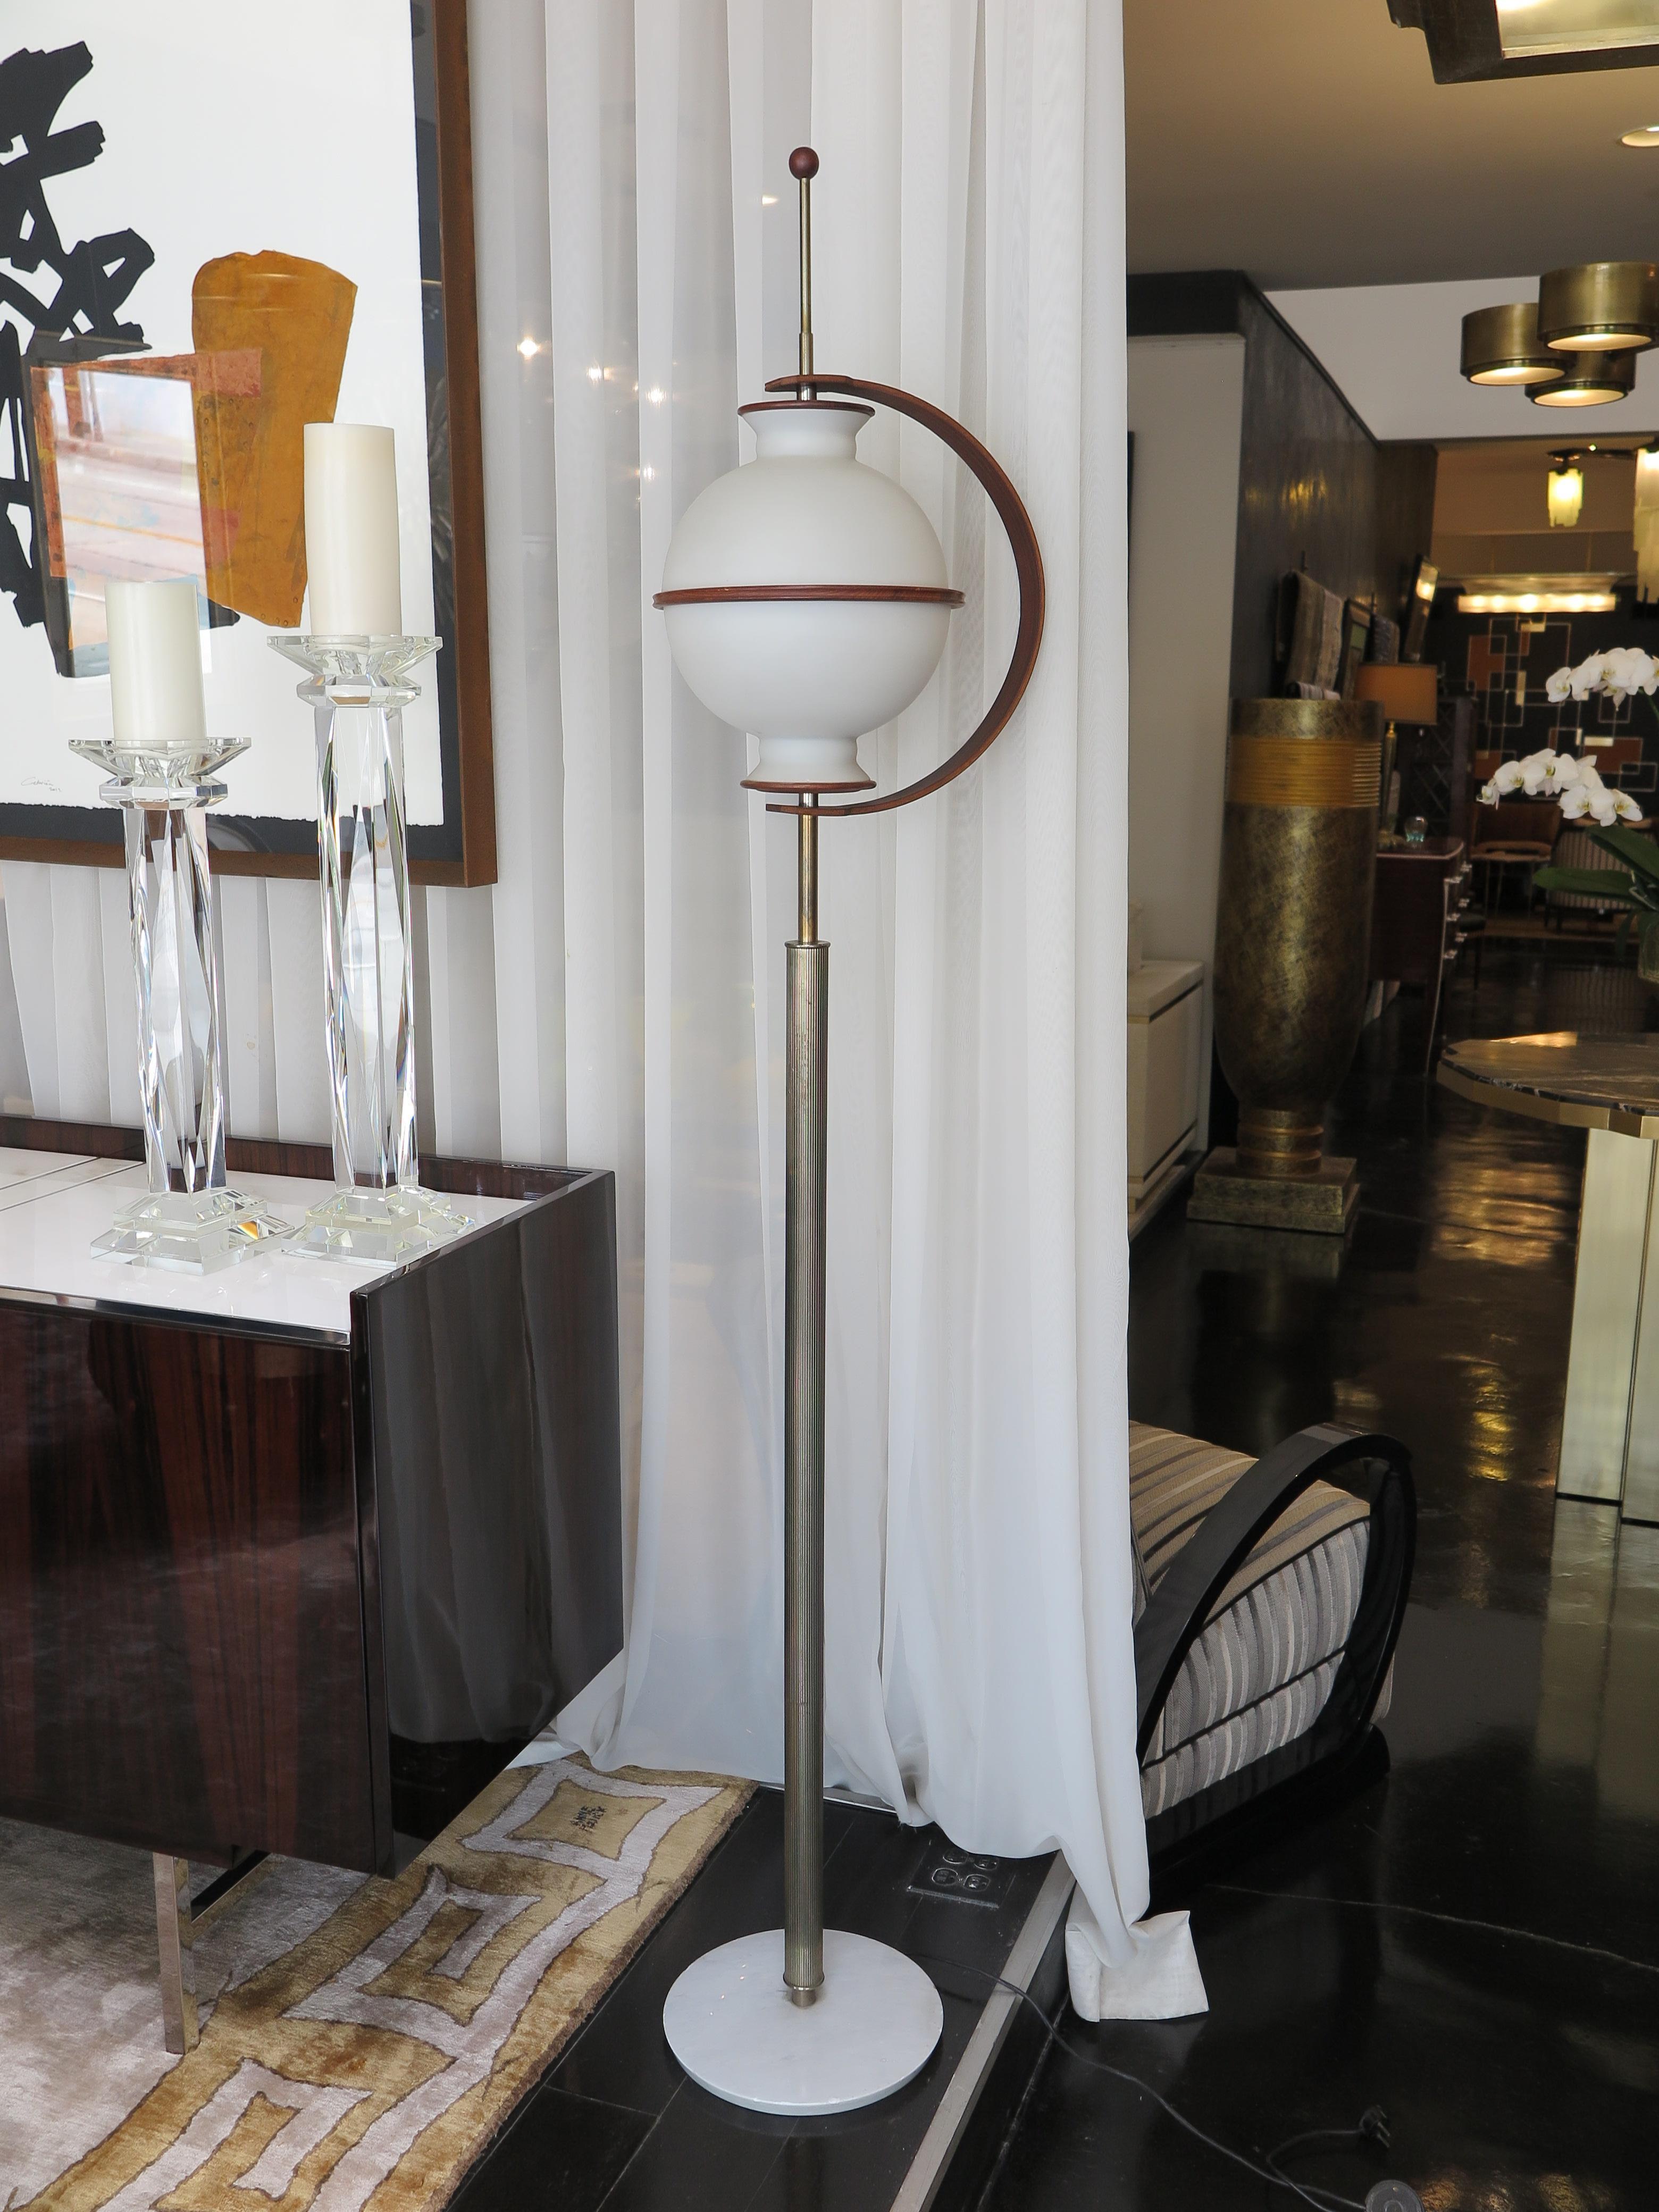 This unusual floor lamp evokes a futuristic aesthetic. Round globe shade in frosted milk glass and framed in a curved wooden arm in rosewood. The ribbed brass stem leads to a round white marble base. This piece feature 3 bulbs inside.